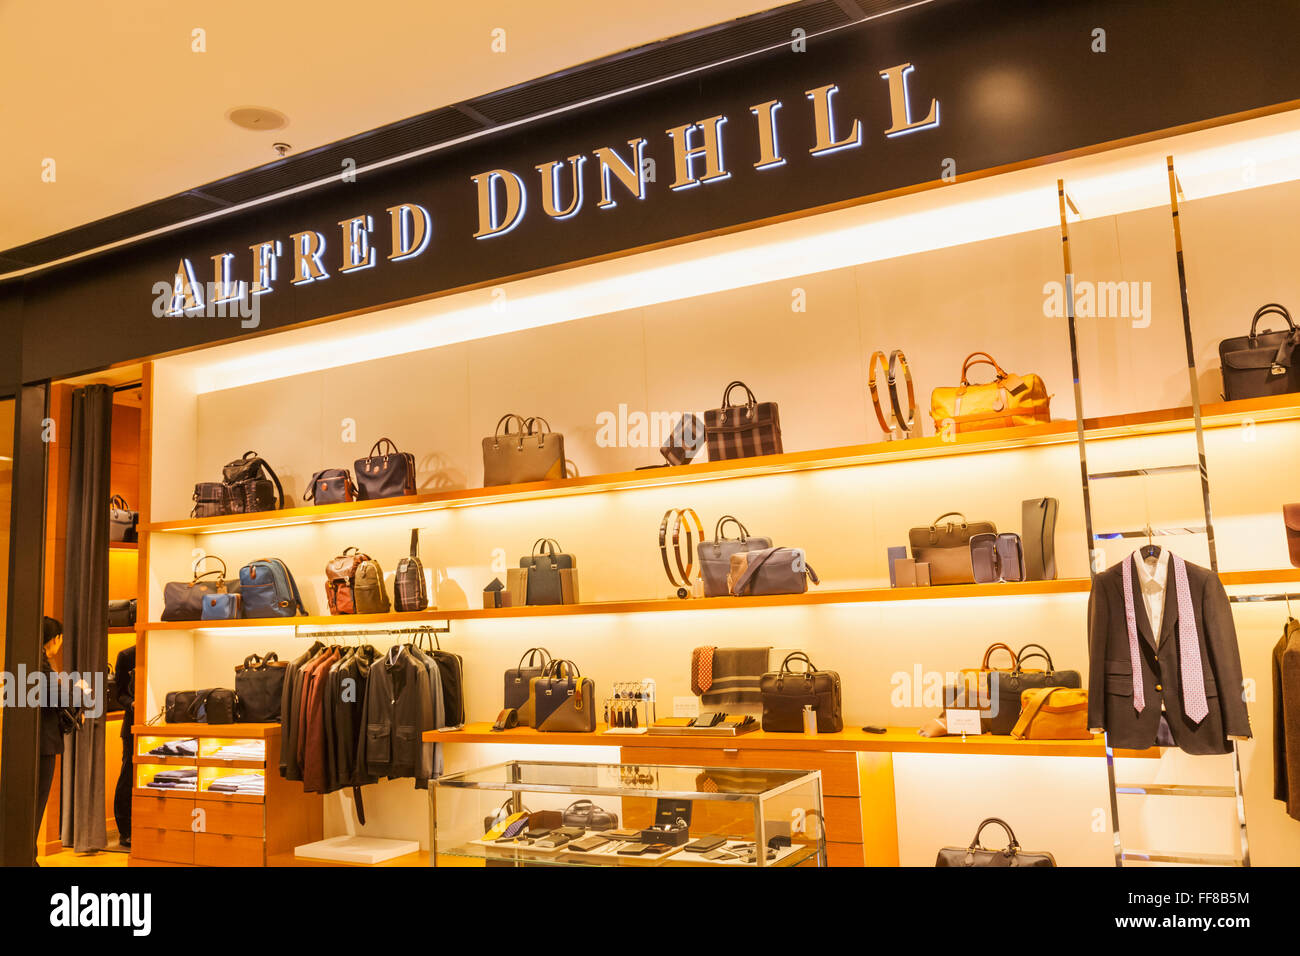 dunhill ifc